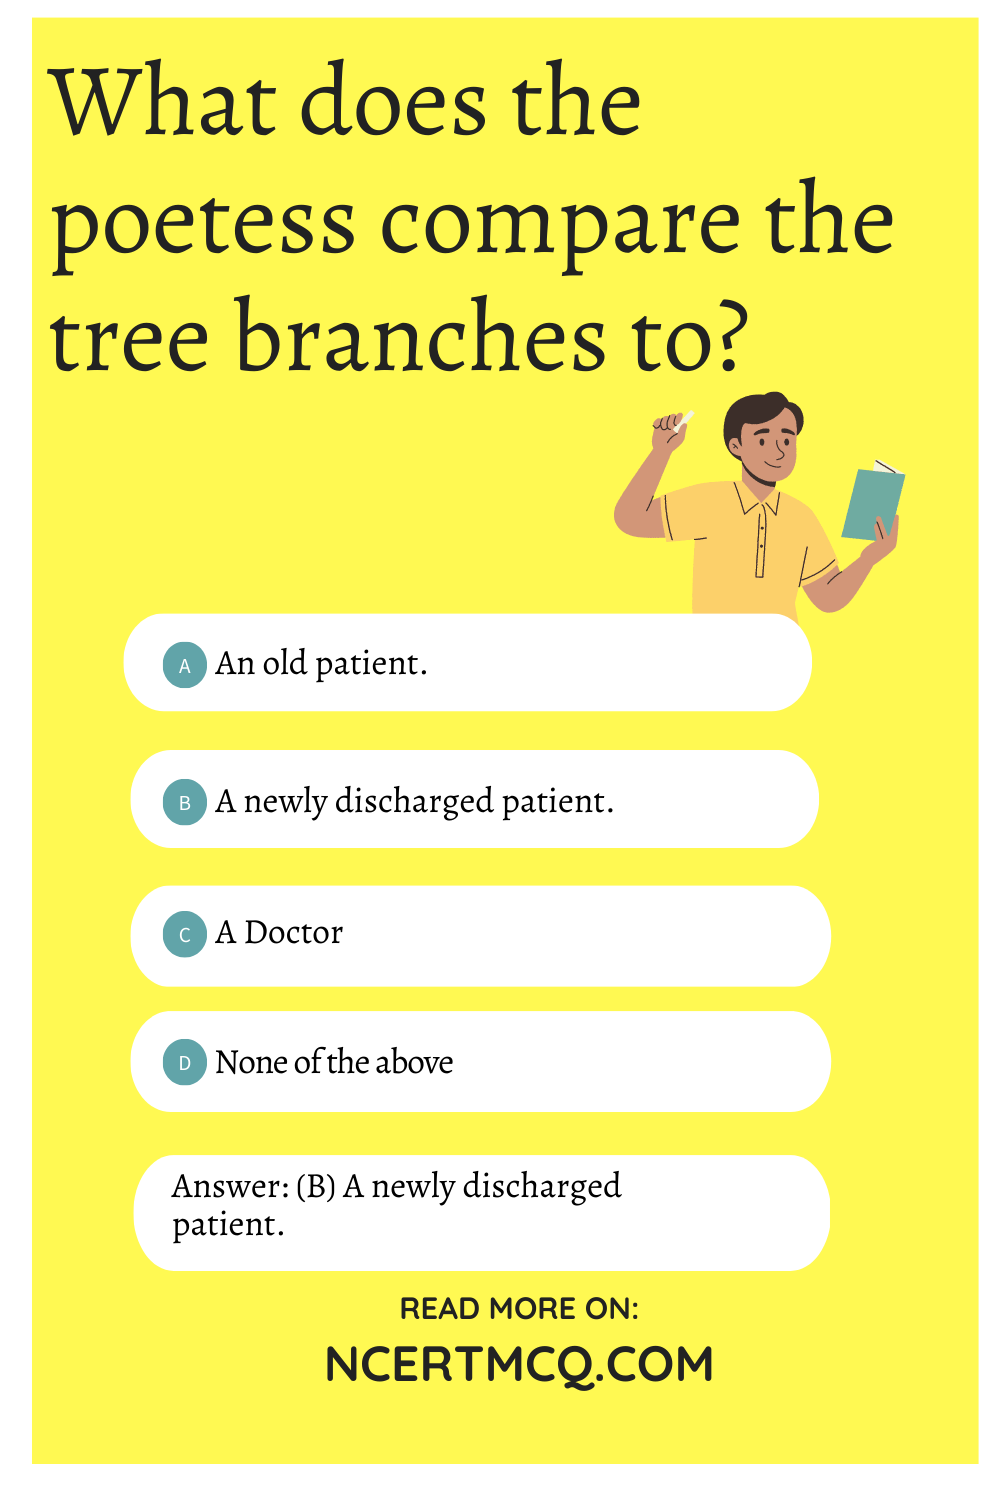 What does the poetess compare the tree branches to?